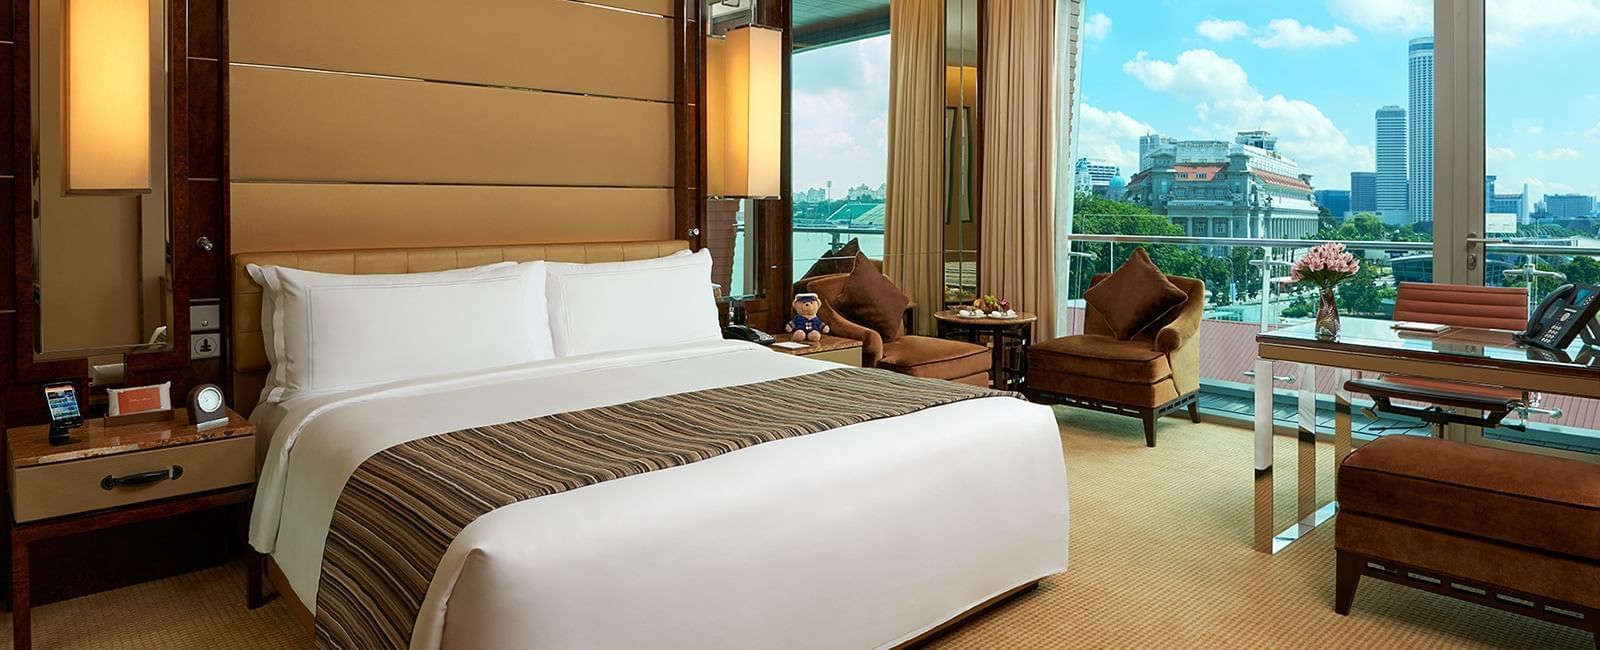 The Premier Room with one king bed and a city view at the hotel